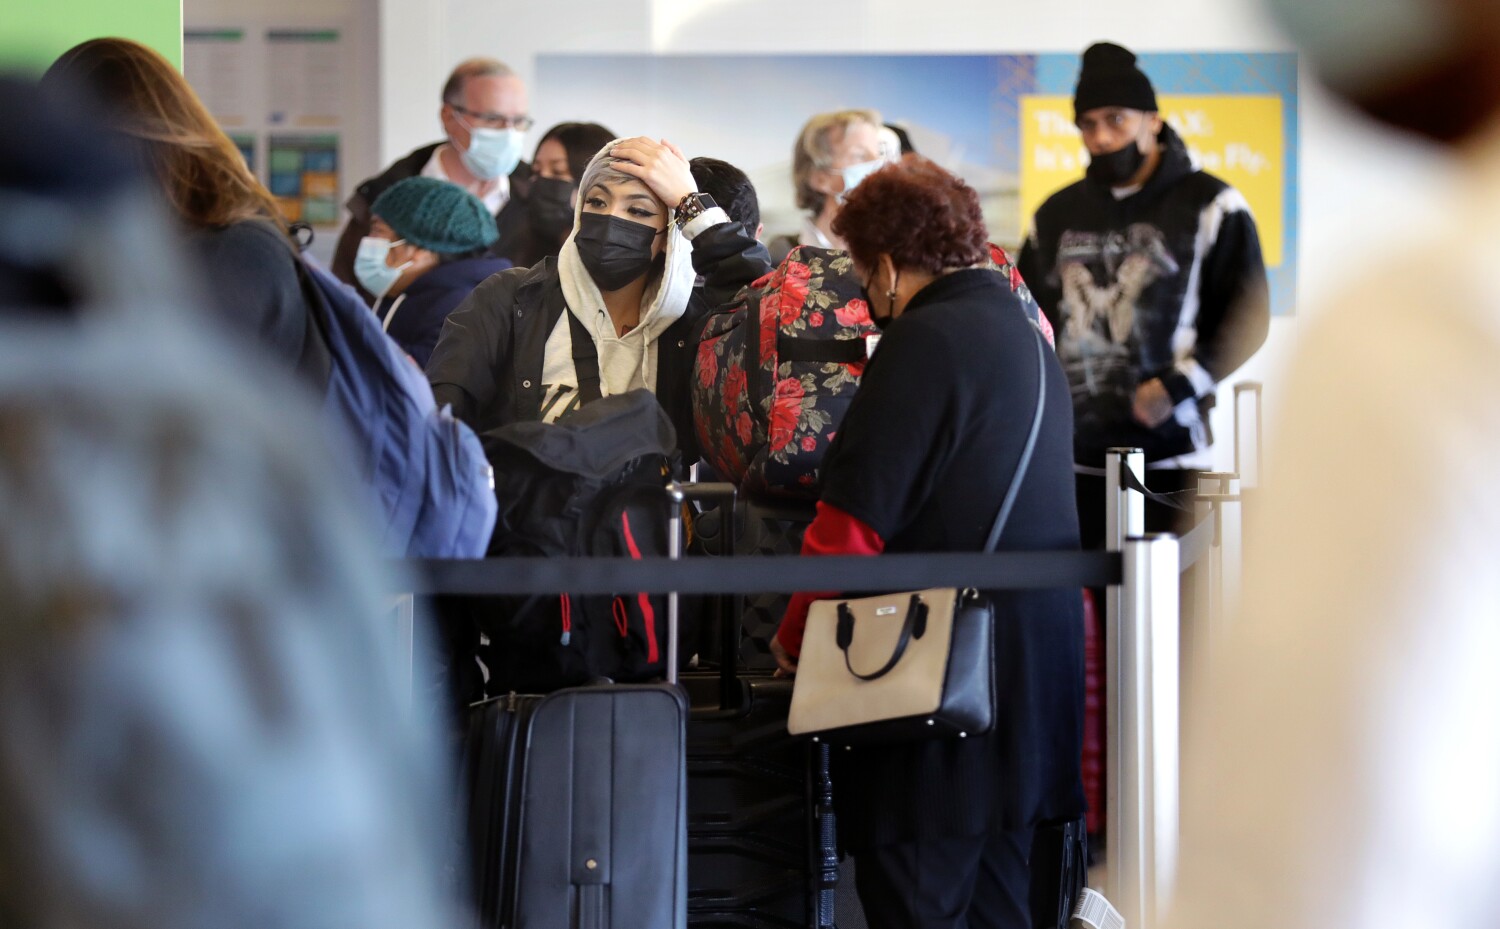 Uber? United? Southwest? LAX? Who is lifting travel mask rules and who's keeping them